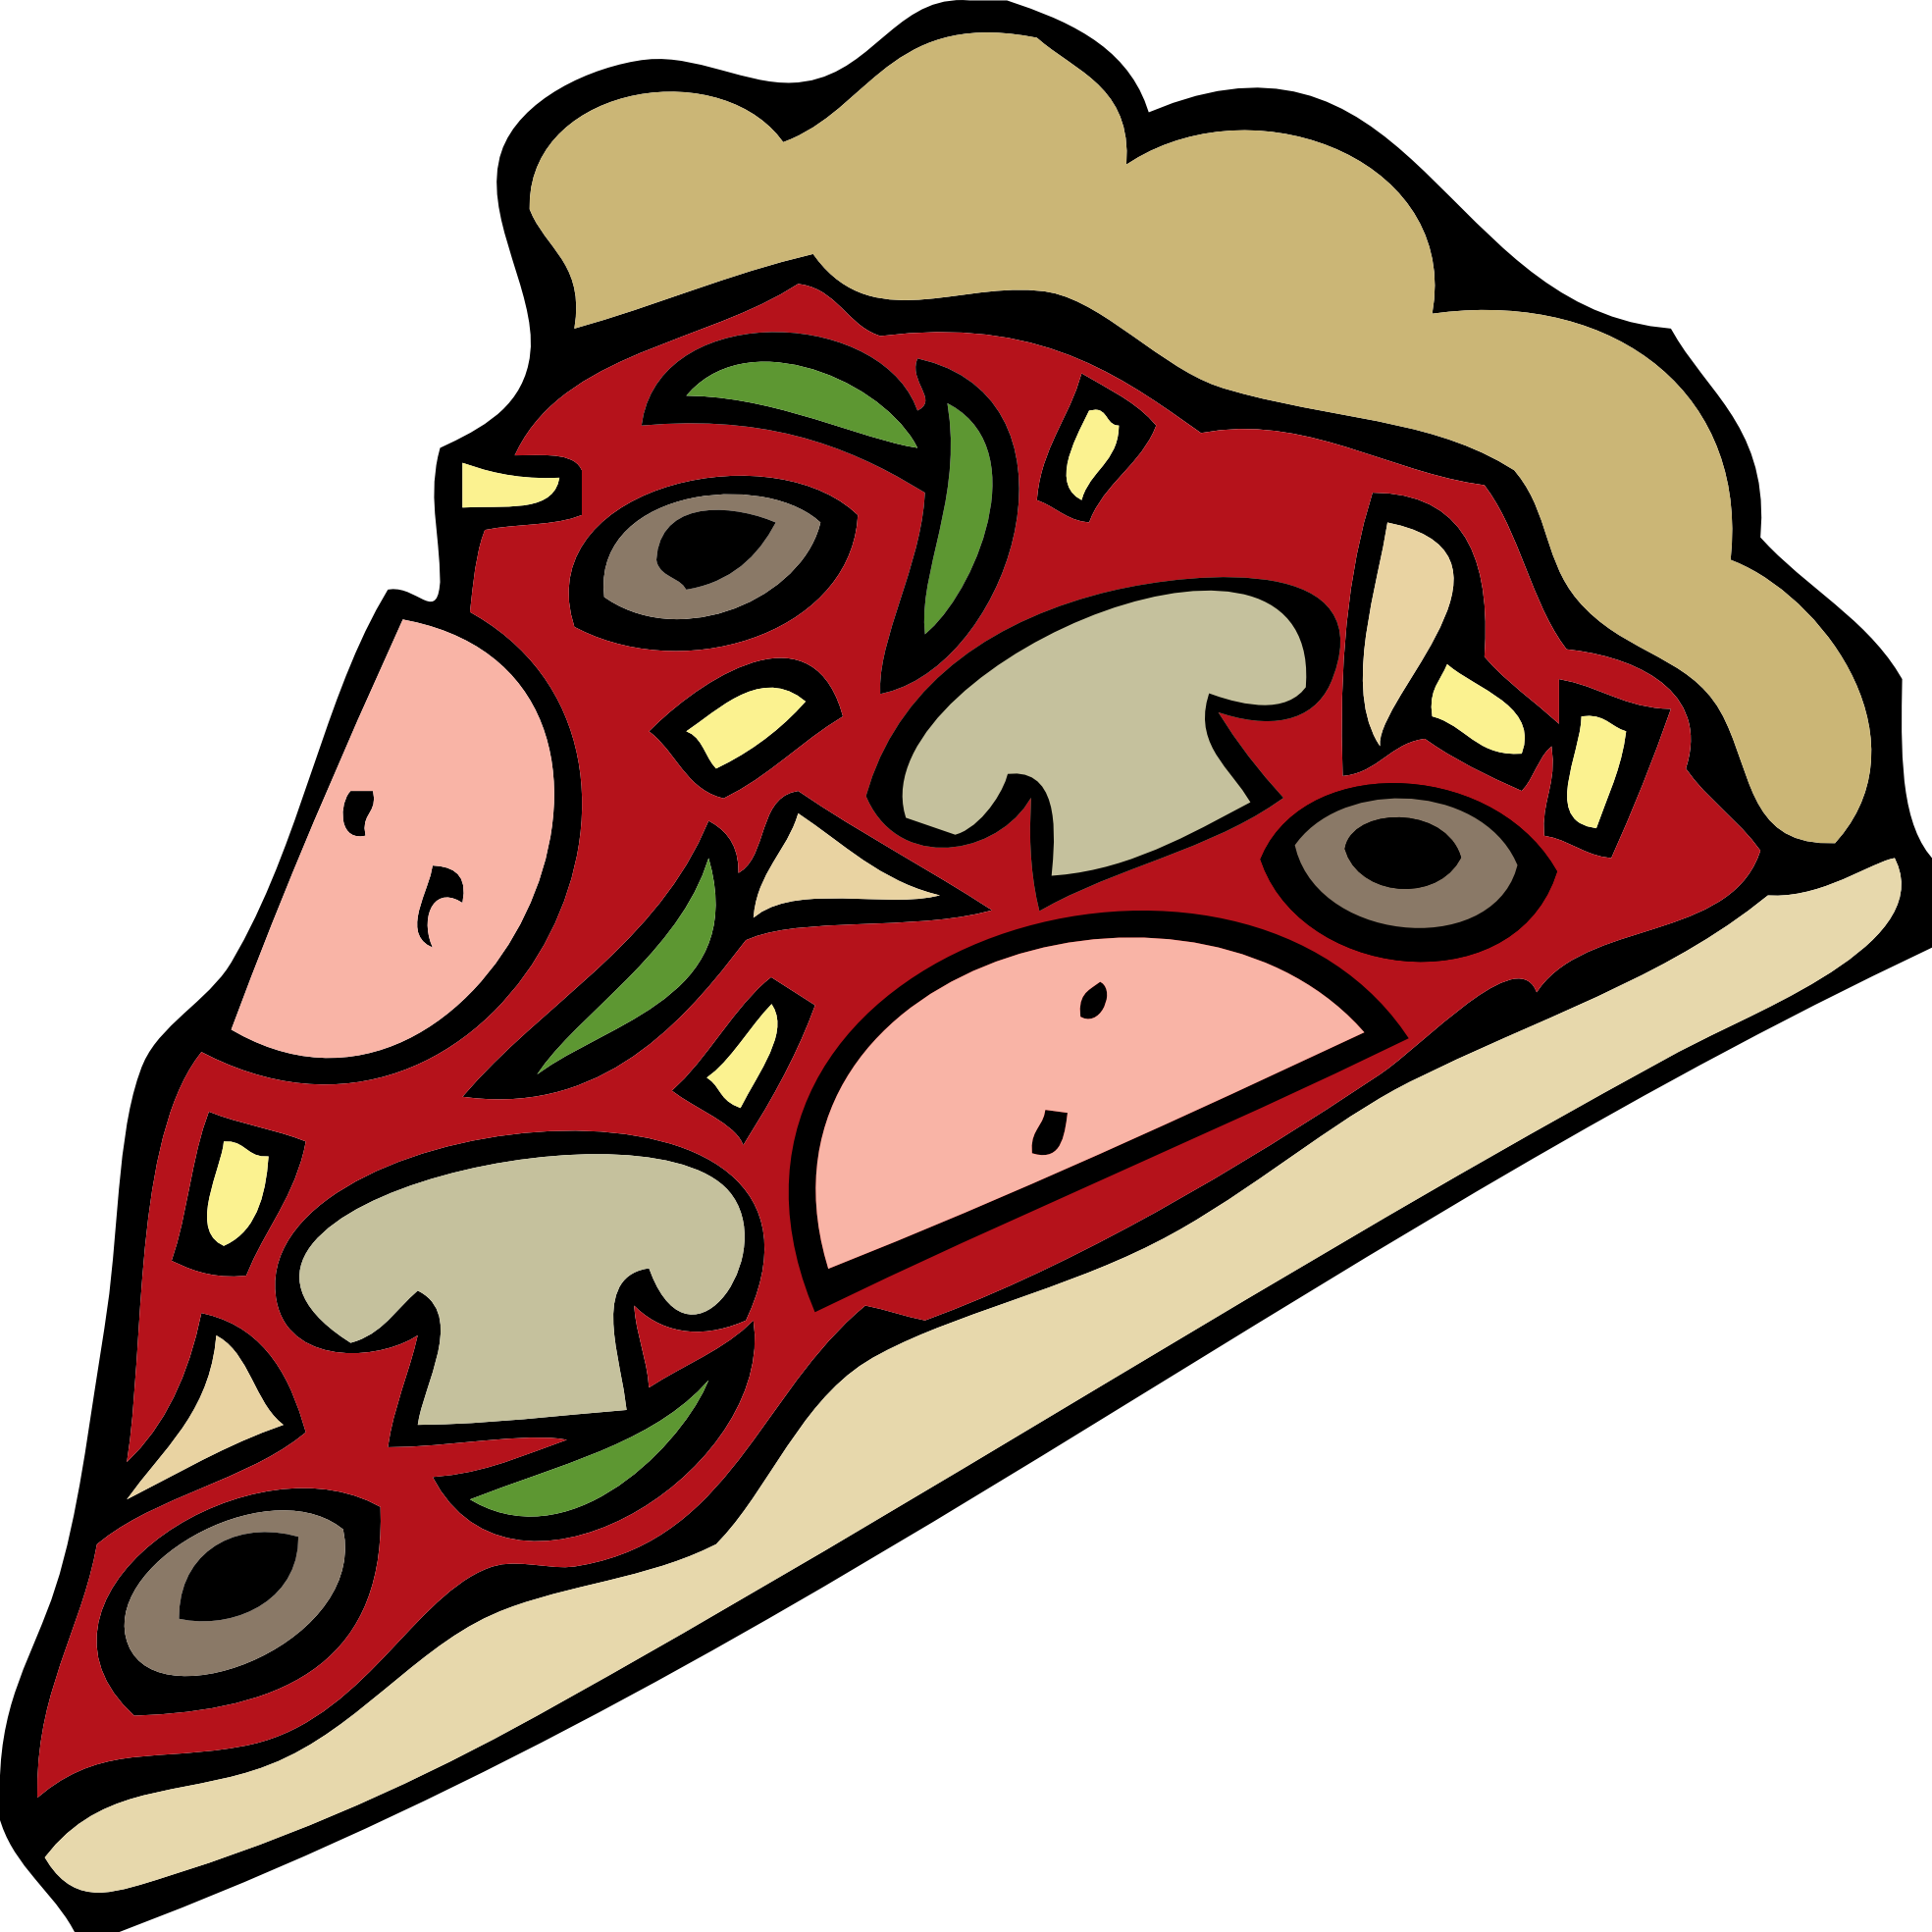 Pizza Slice Png 249 - Pizza Slice, Transparent background PNG HD thumbnail